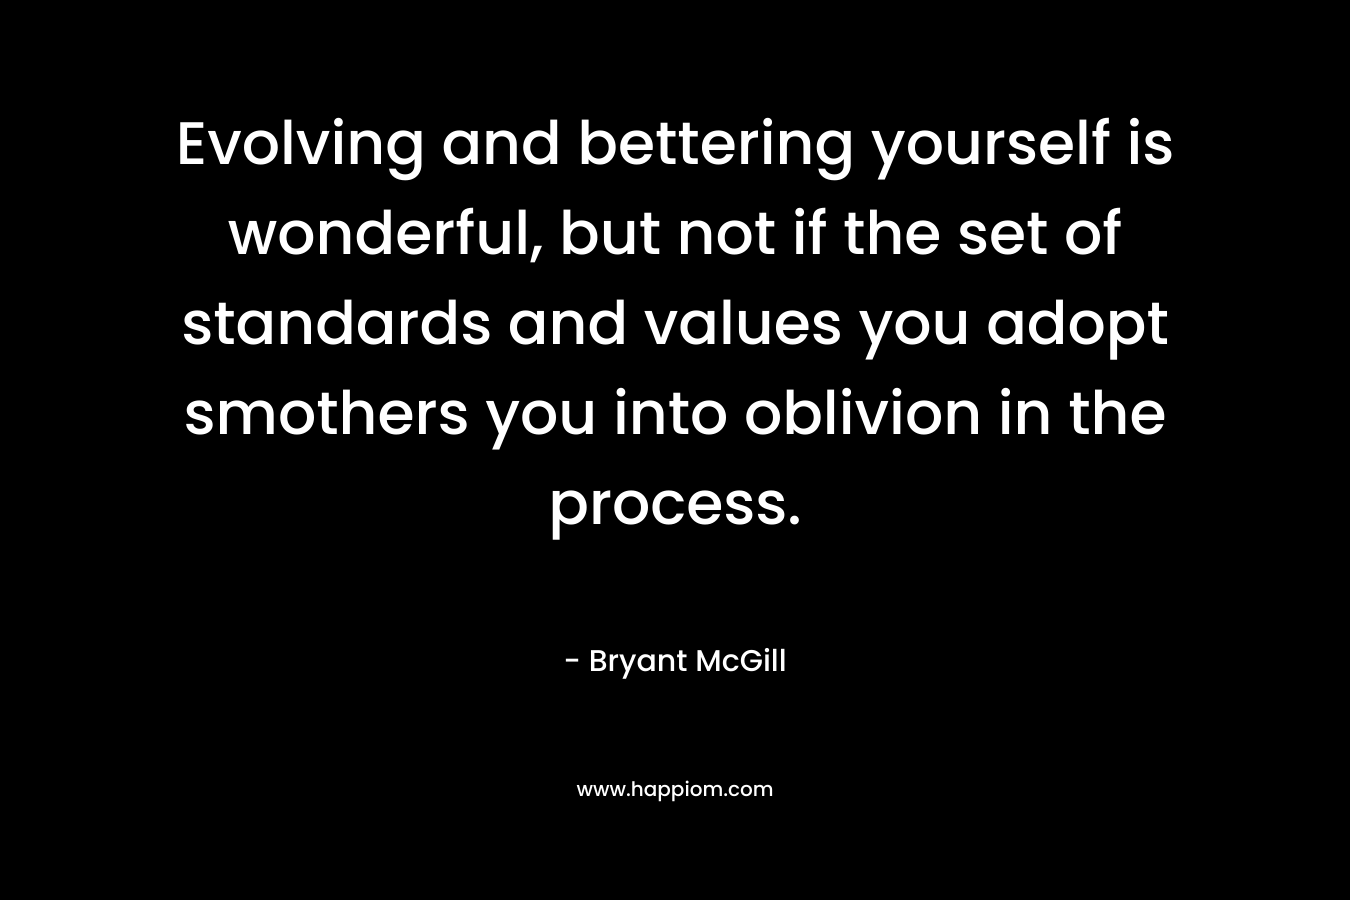 Evolving and bettering yourself is wonderful, but not if the set of standards and values you adopt smothers you into oblivion in the process. – Bryant McGill